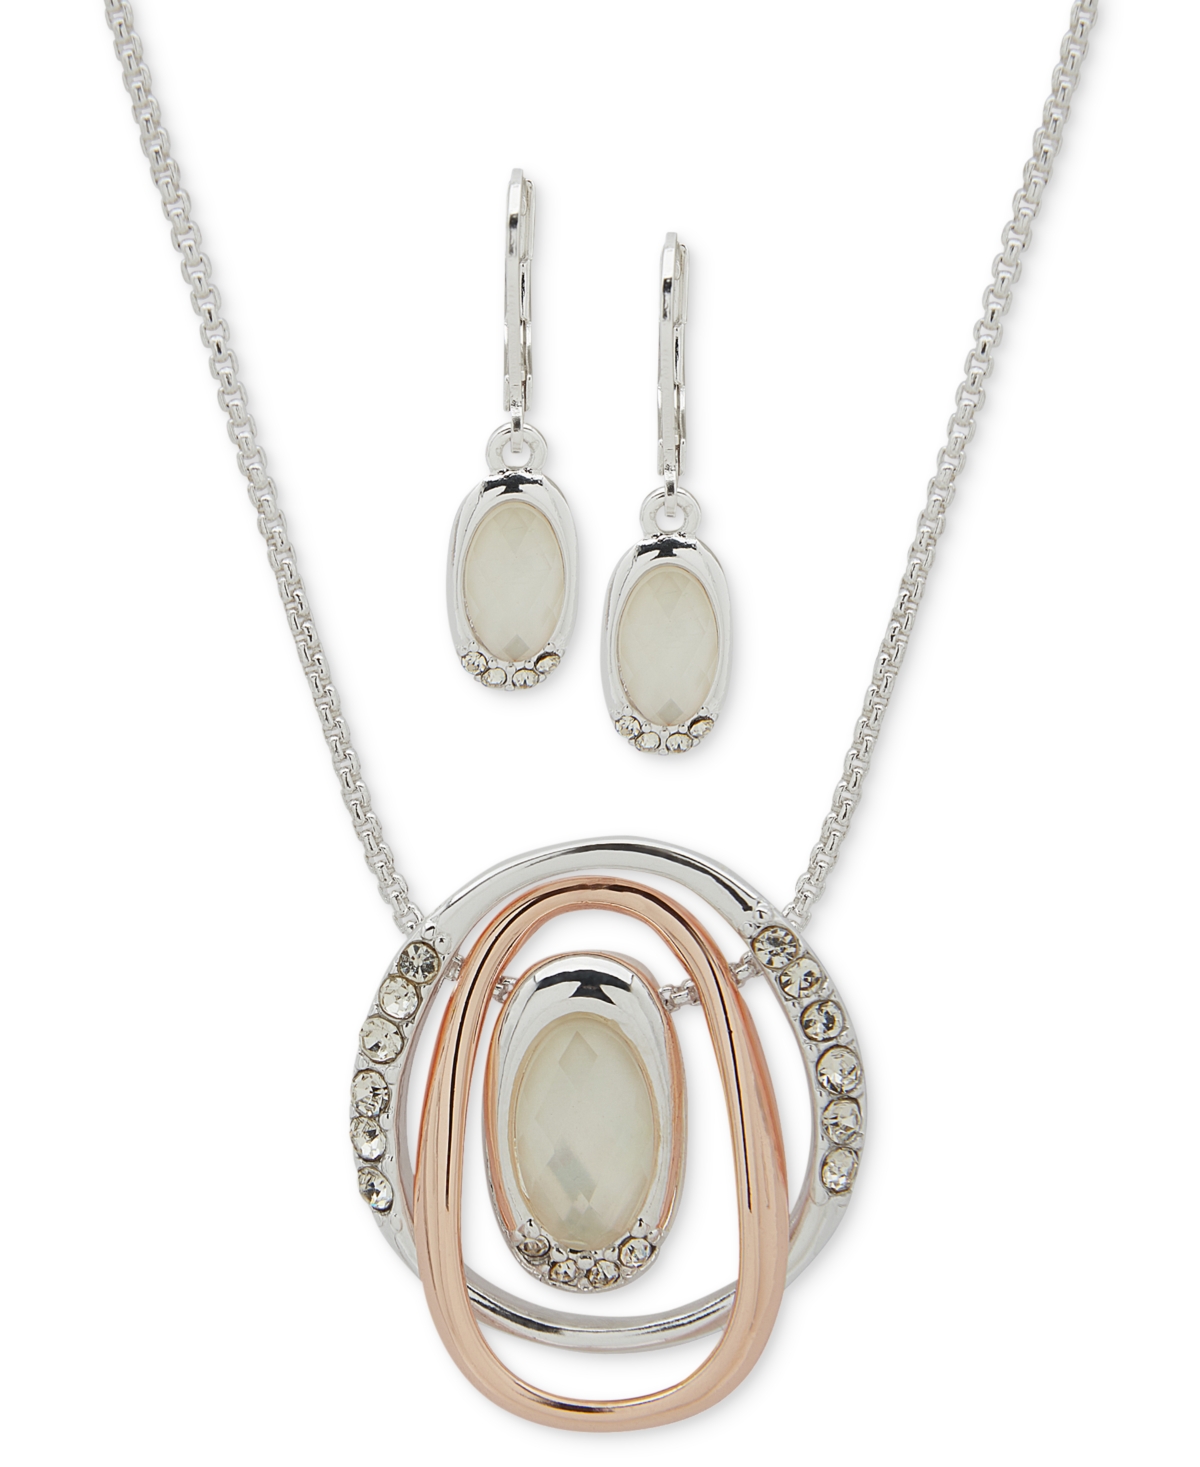 Two-Tone Pave & Stone Orbital Pendant Necklace & Drop Earrings Set - Crystal